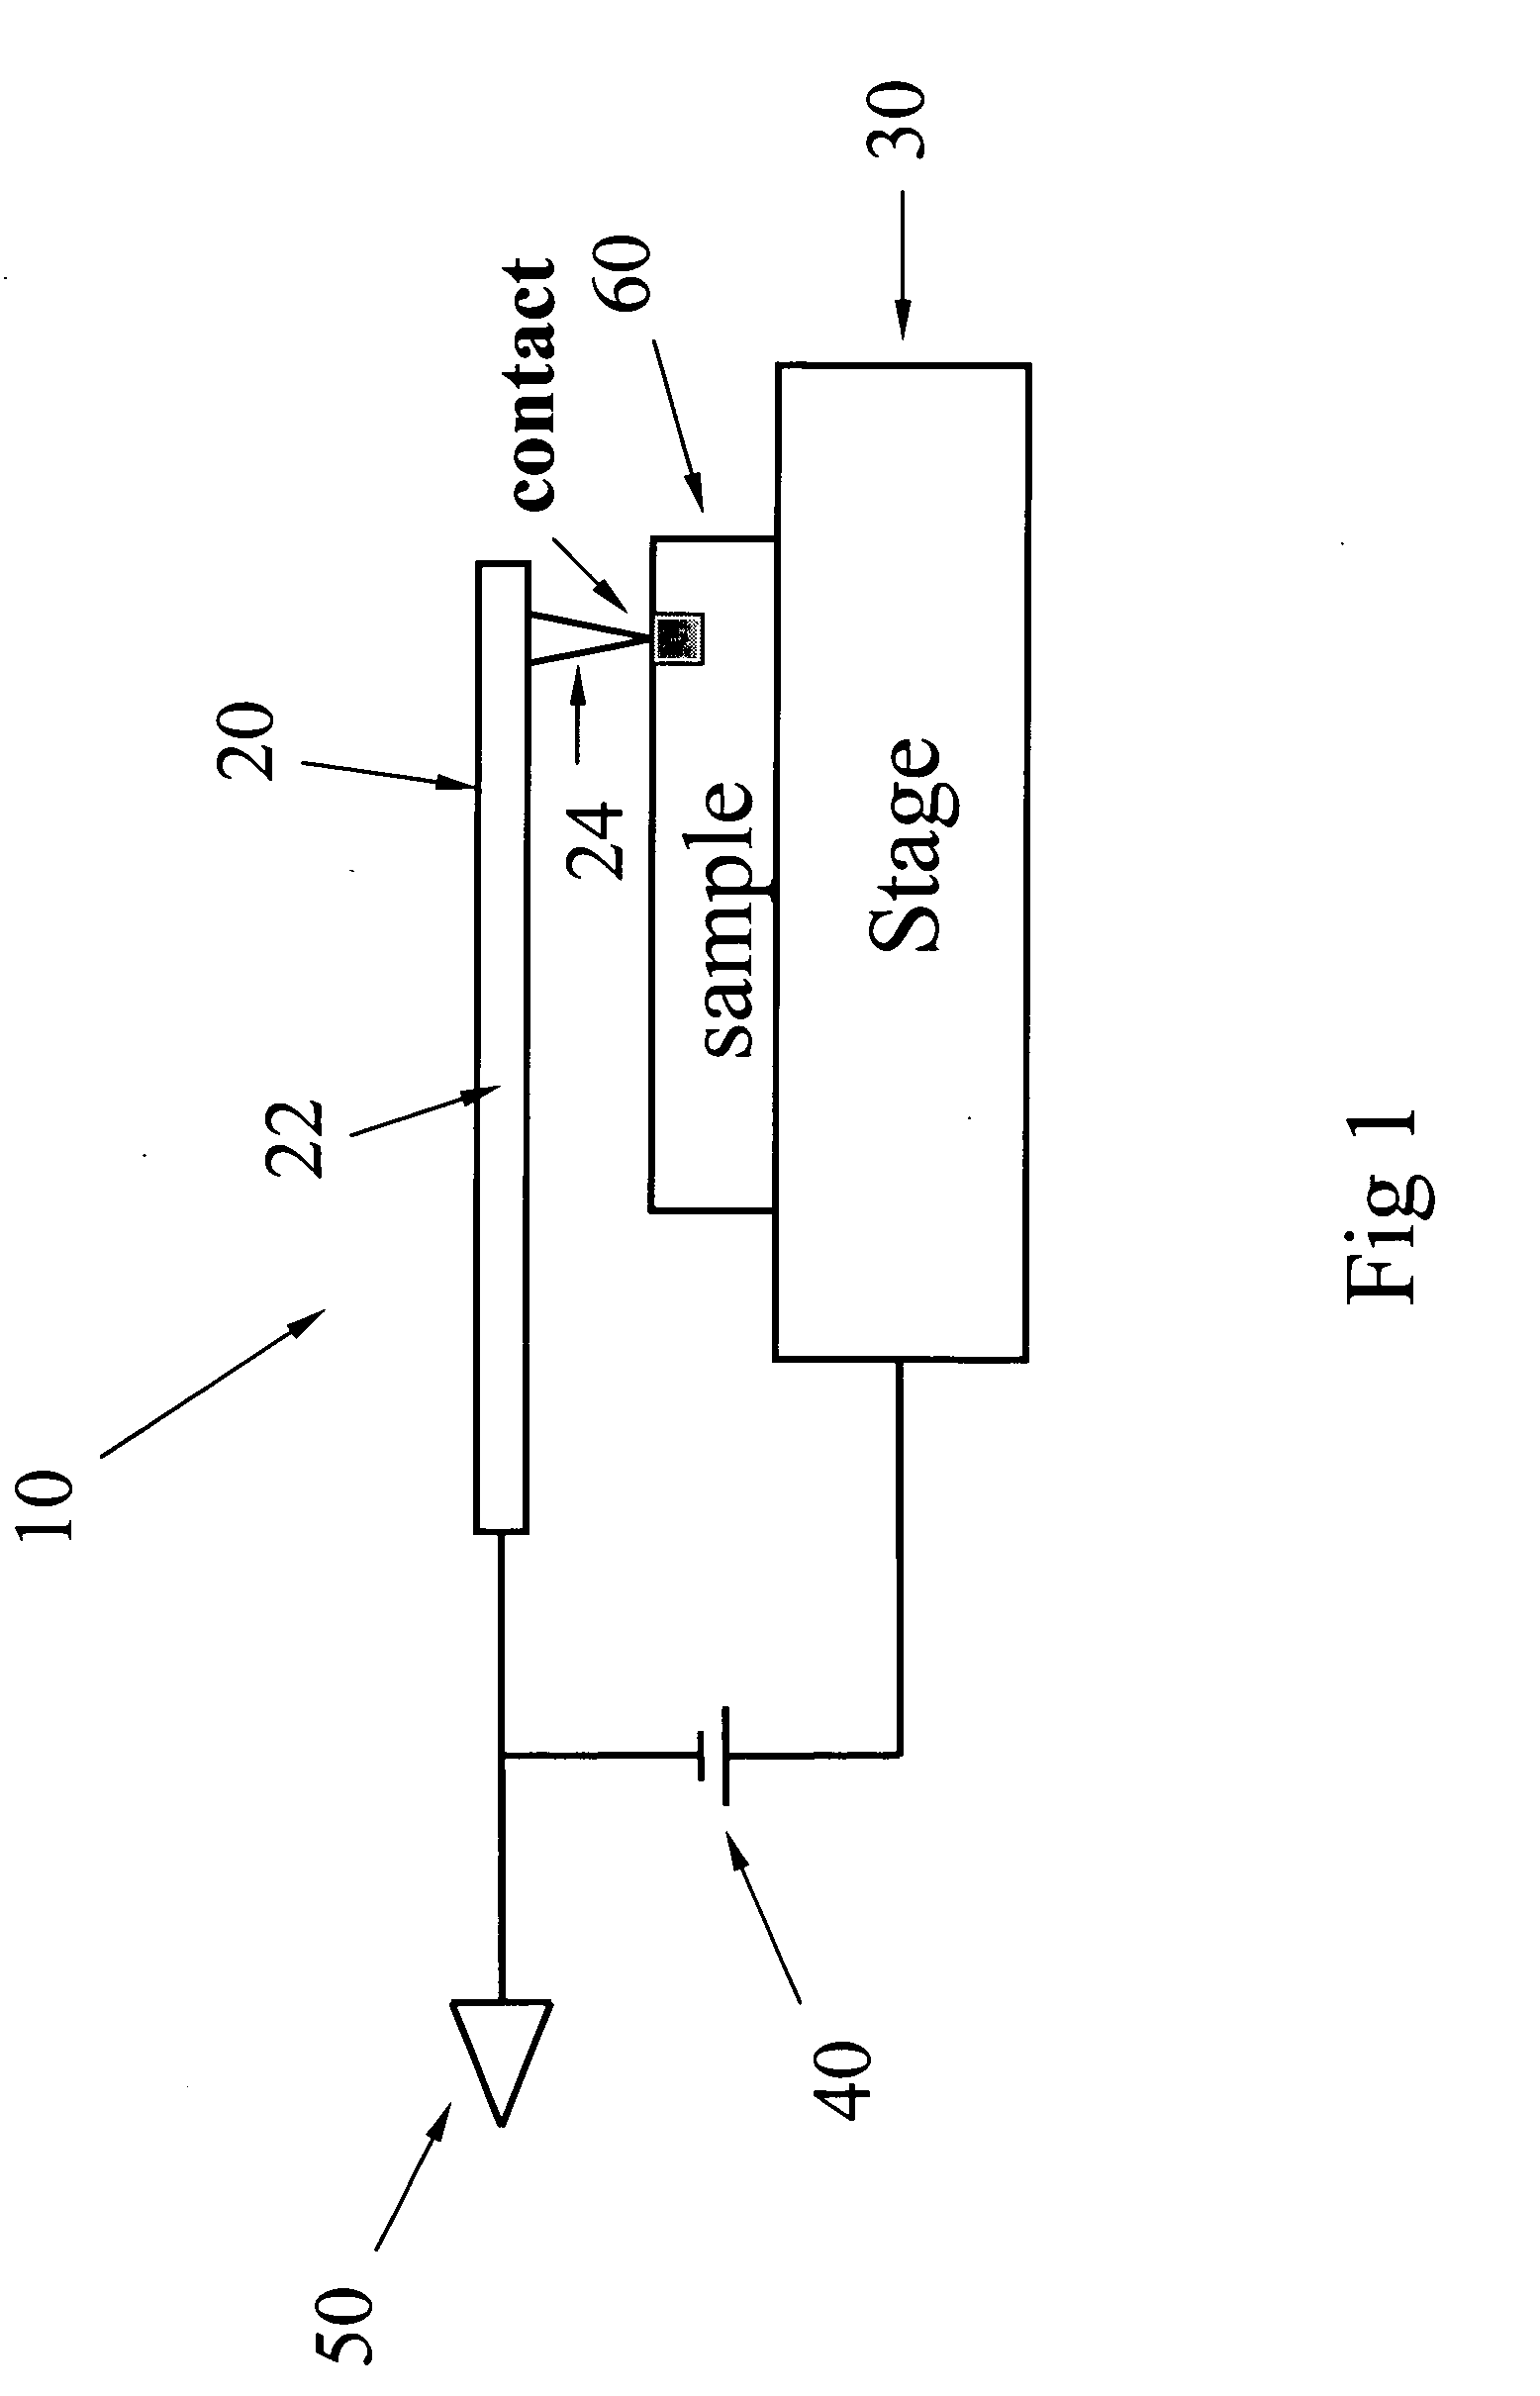 Method using conductive atomic force microscopy to measure contact leakage current